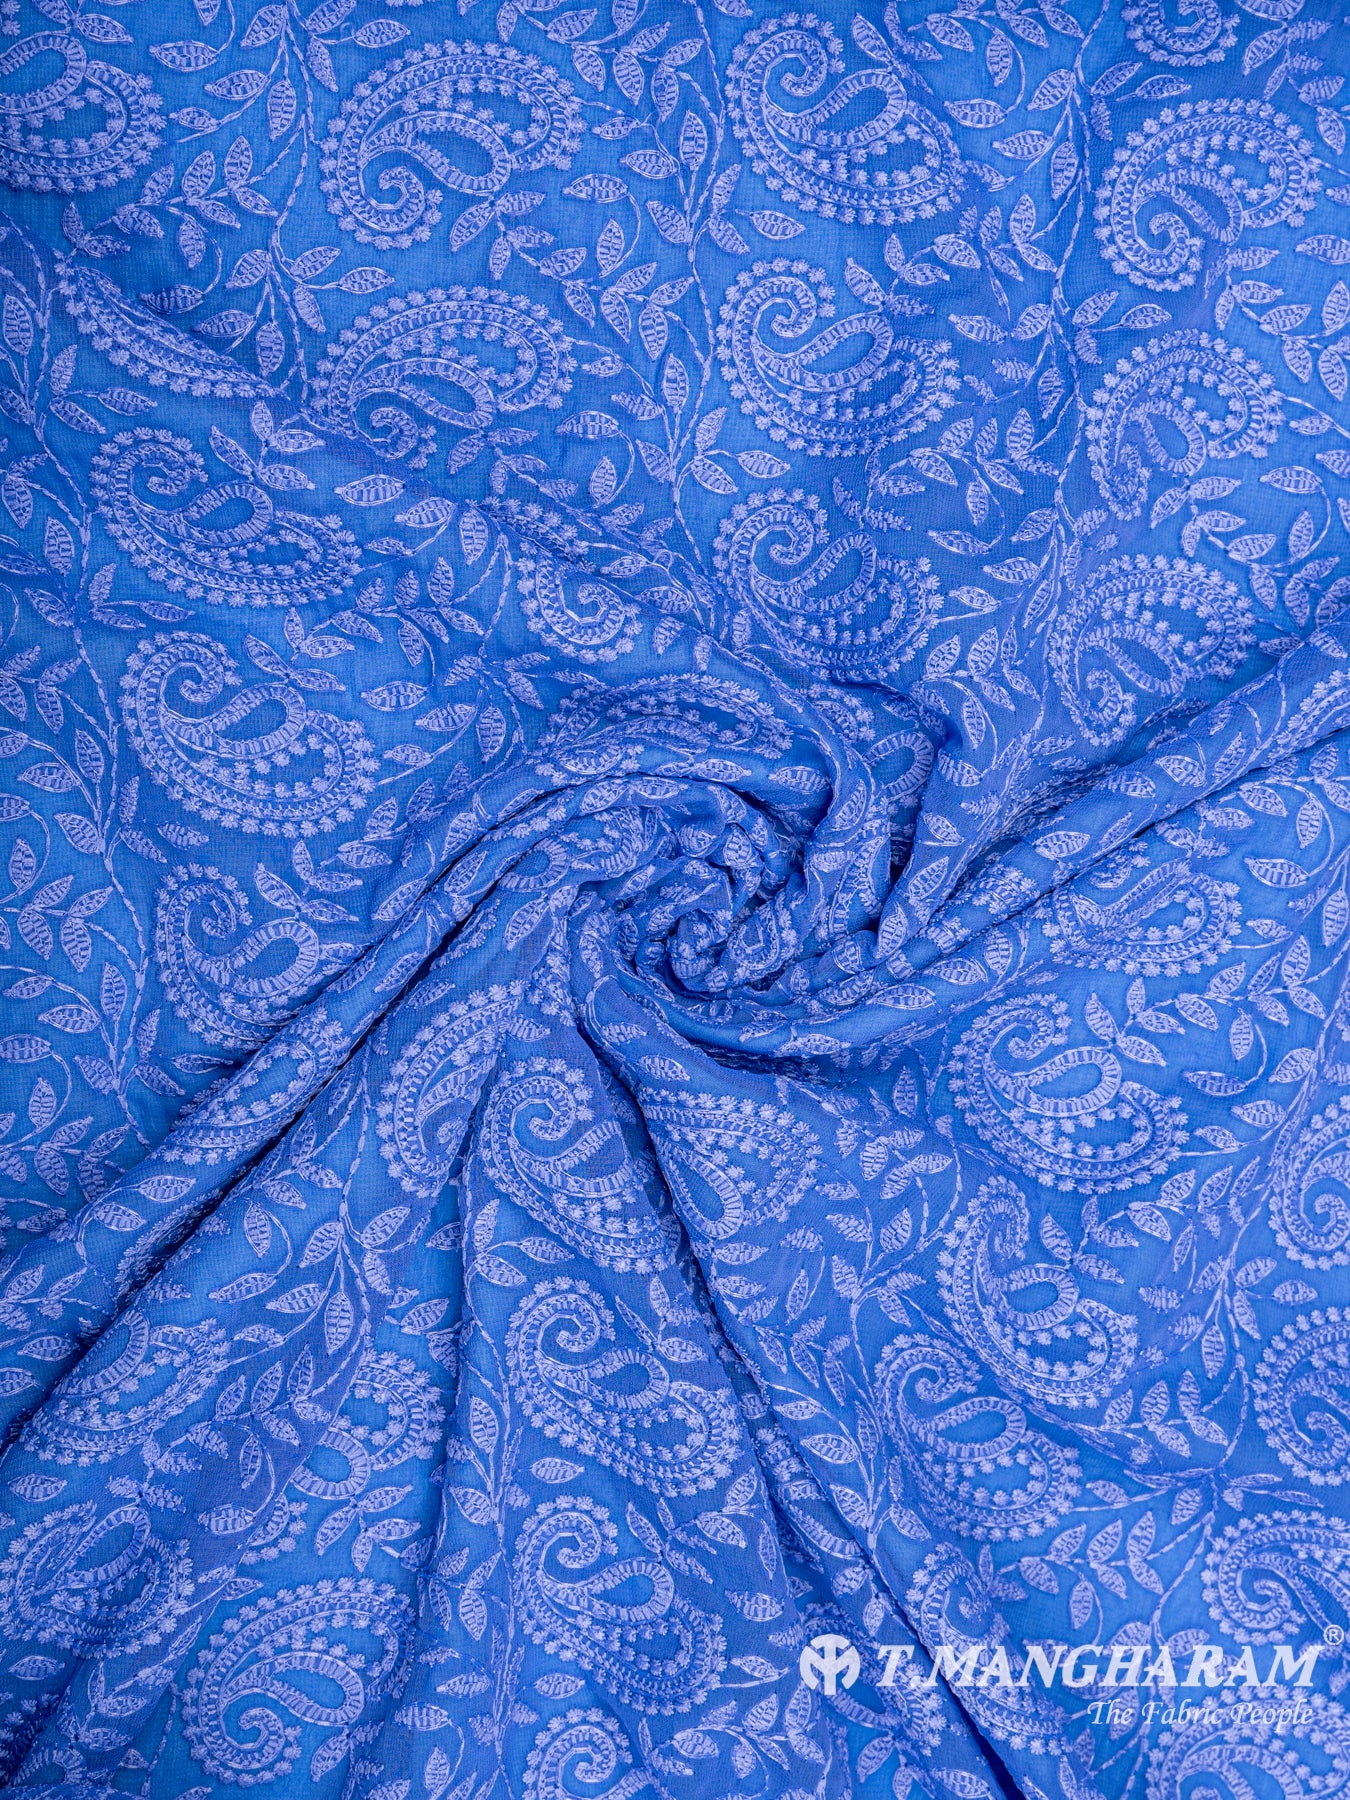 Blue Net Embroidery Fabric - EC6527 view-1